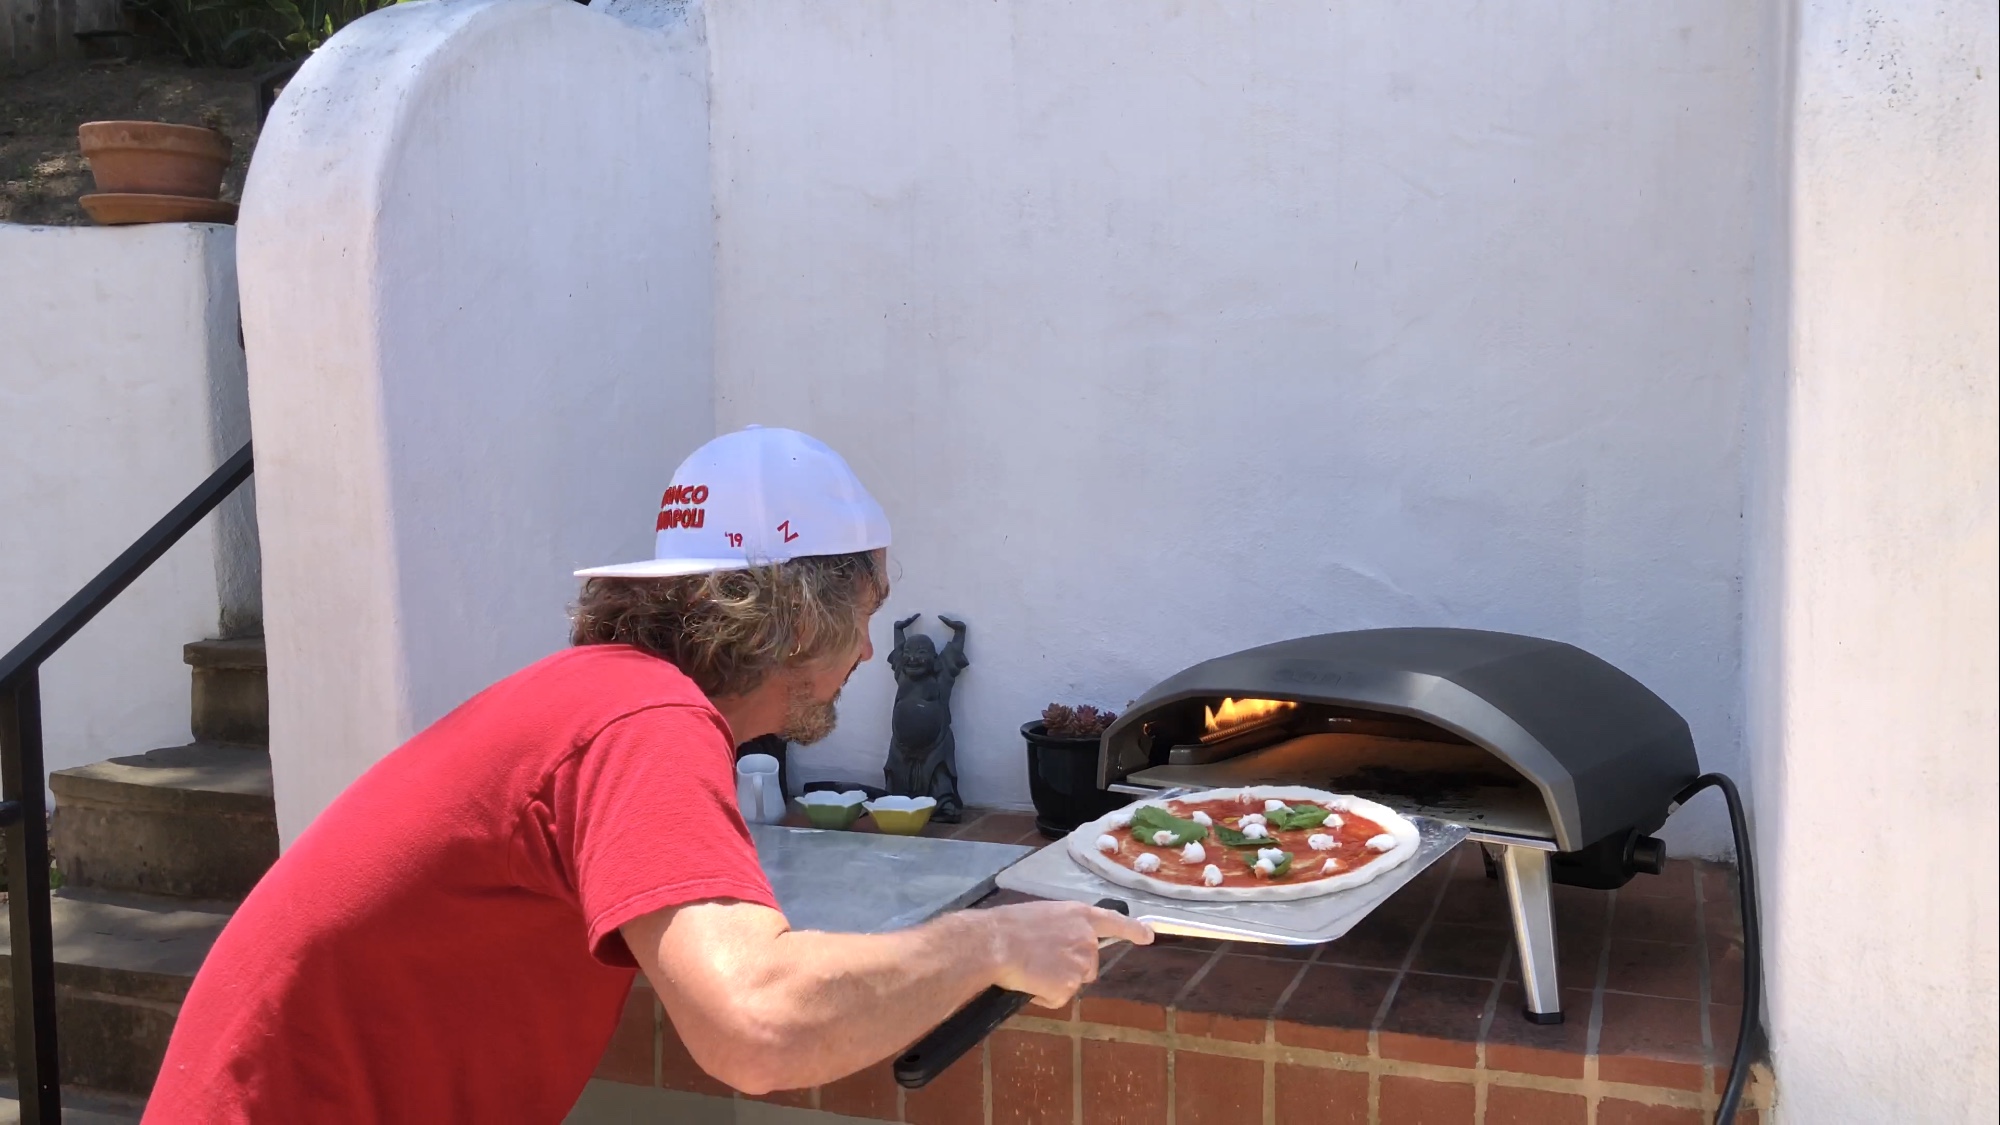 Ooni How To! | Pizza Margherita in the Ooni Koda 16 Pizza Oven